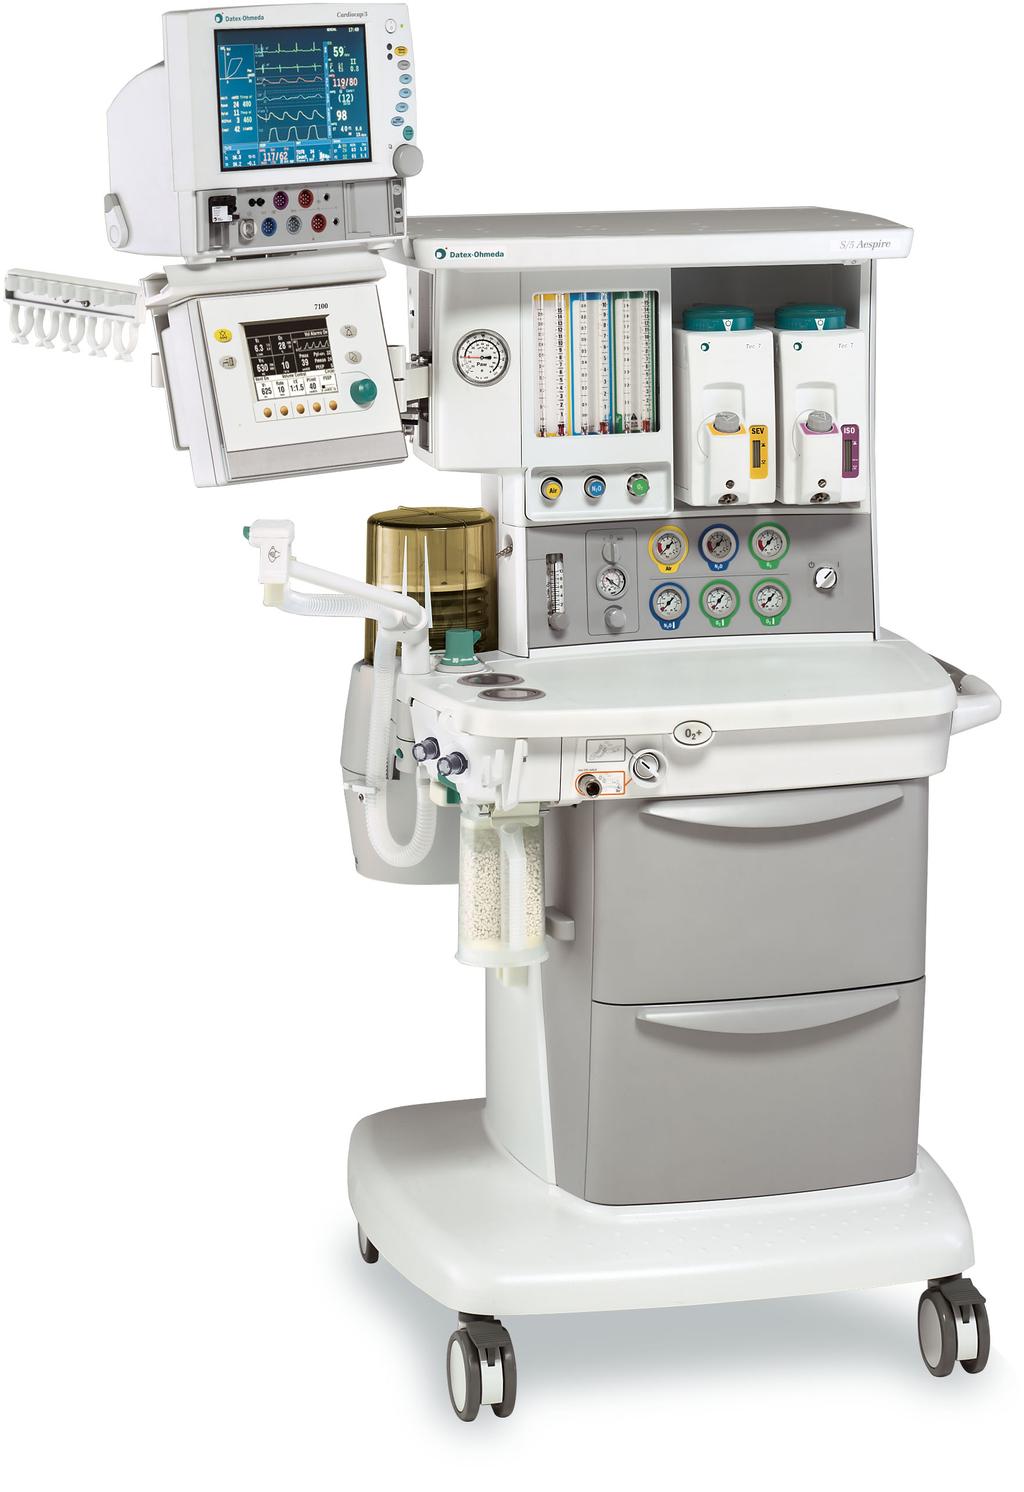 GE Healthcare Aespire 7100 Essential performance Compact design Features Enhanced monitor integration capabilities with our Datex-Ohmeda Anesthesia Monitor and Compact Anesthesia monitor Lightweight